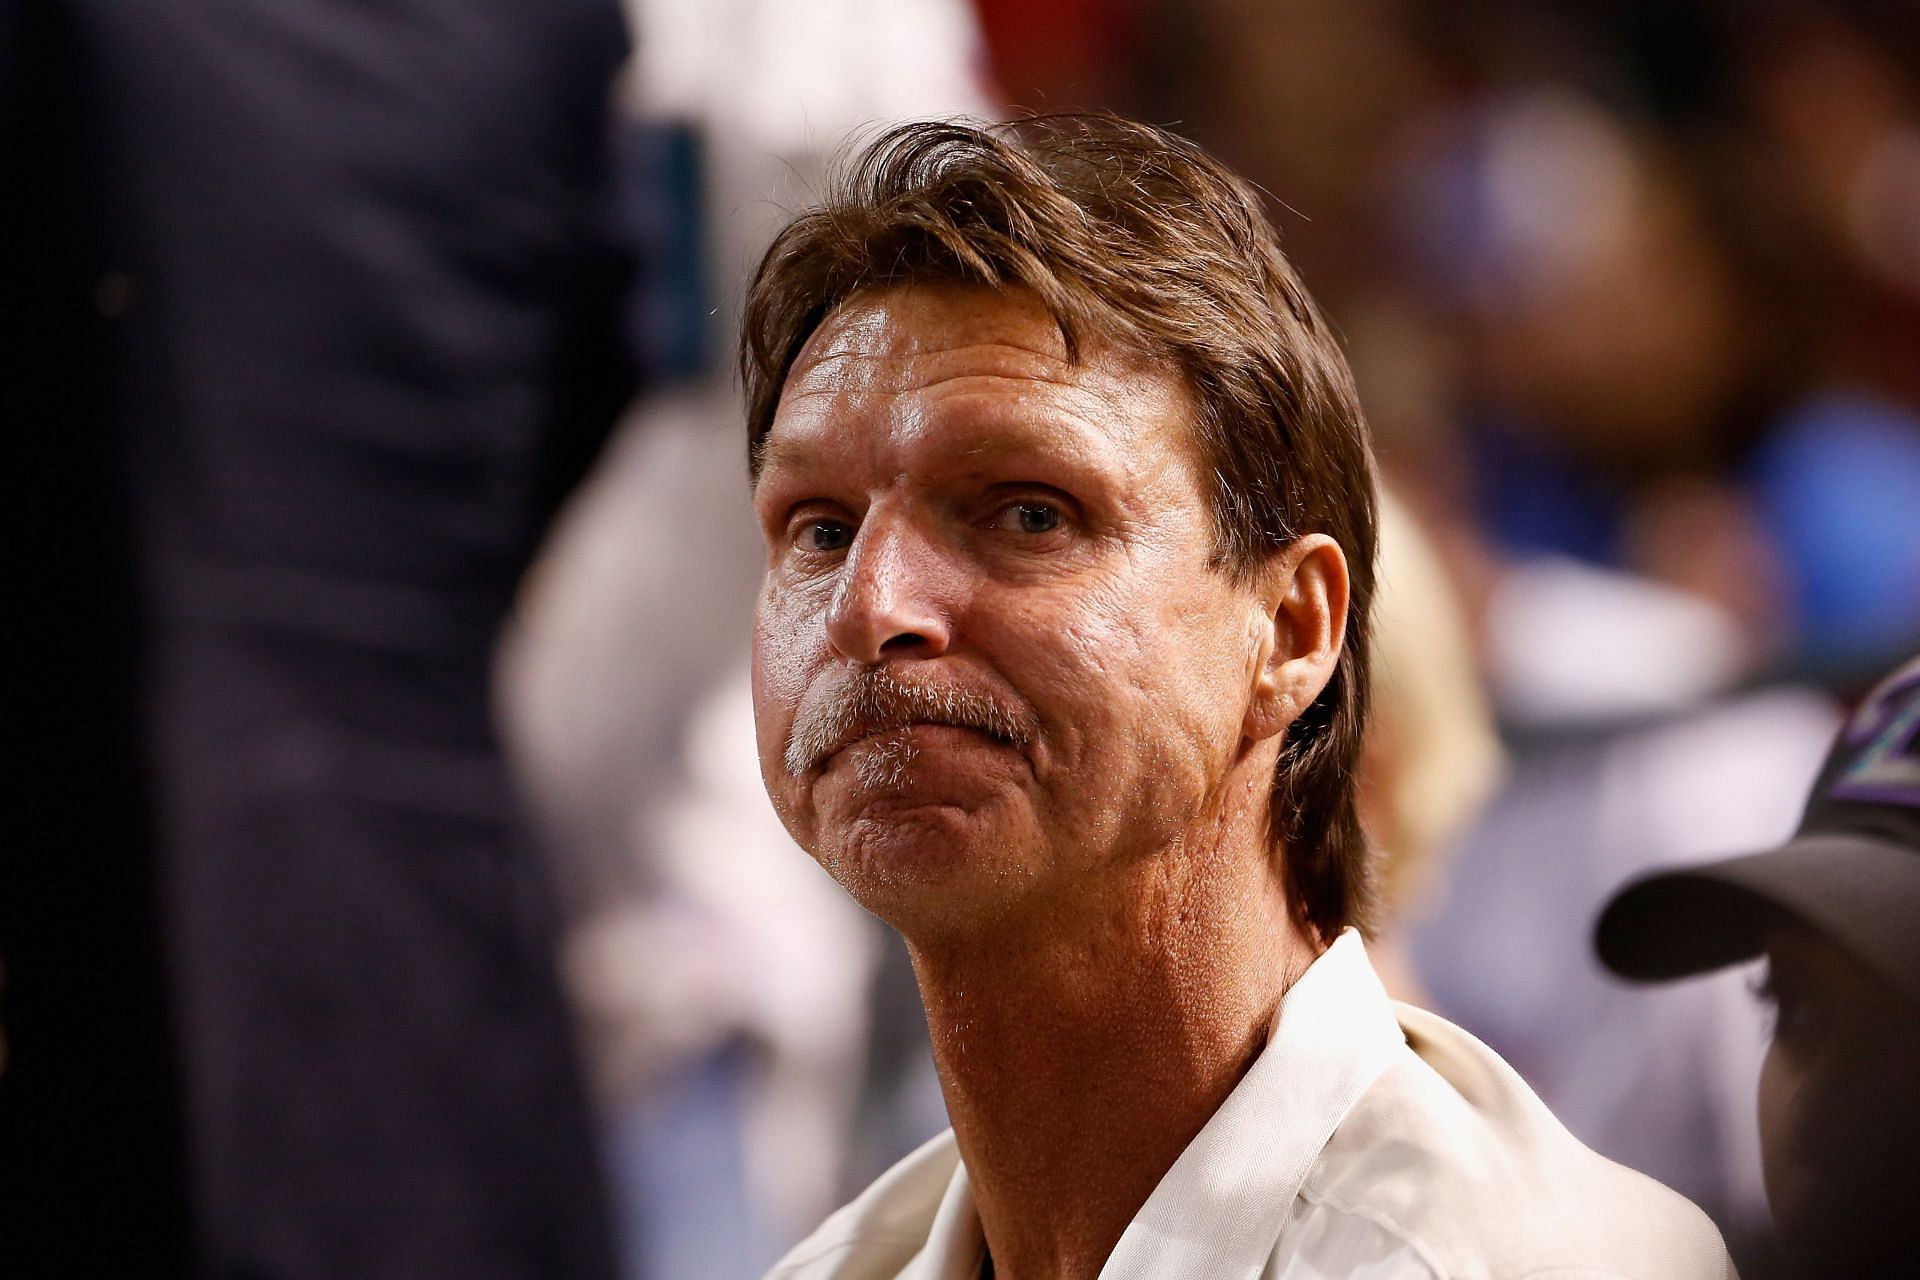 Randy Johnson was definitely not aiming for the bird. Or was he?